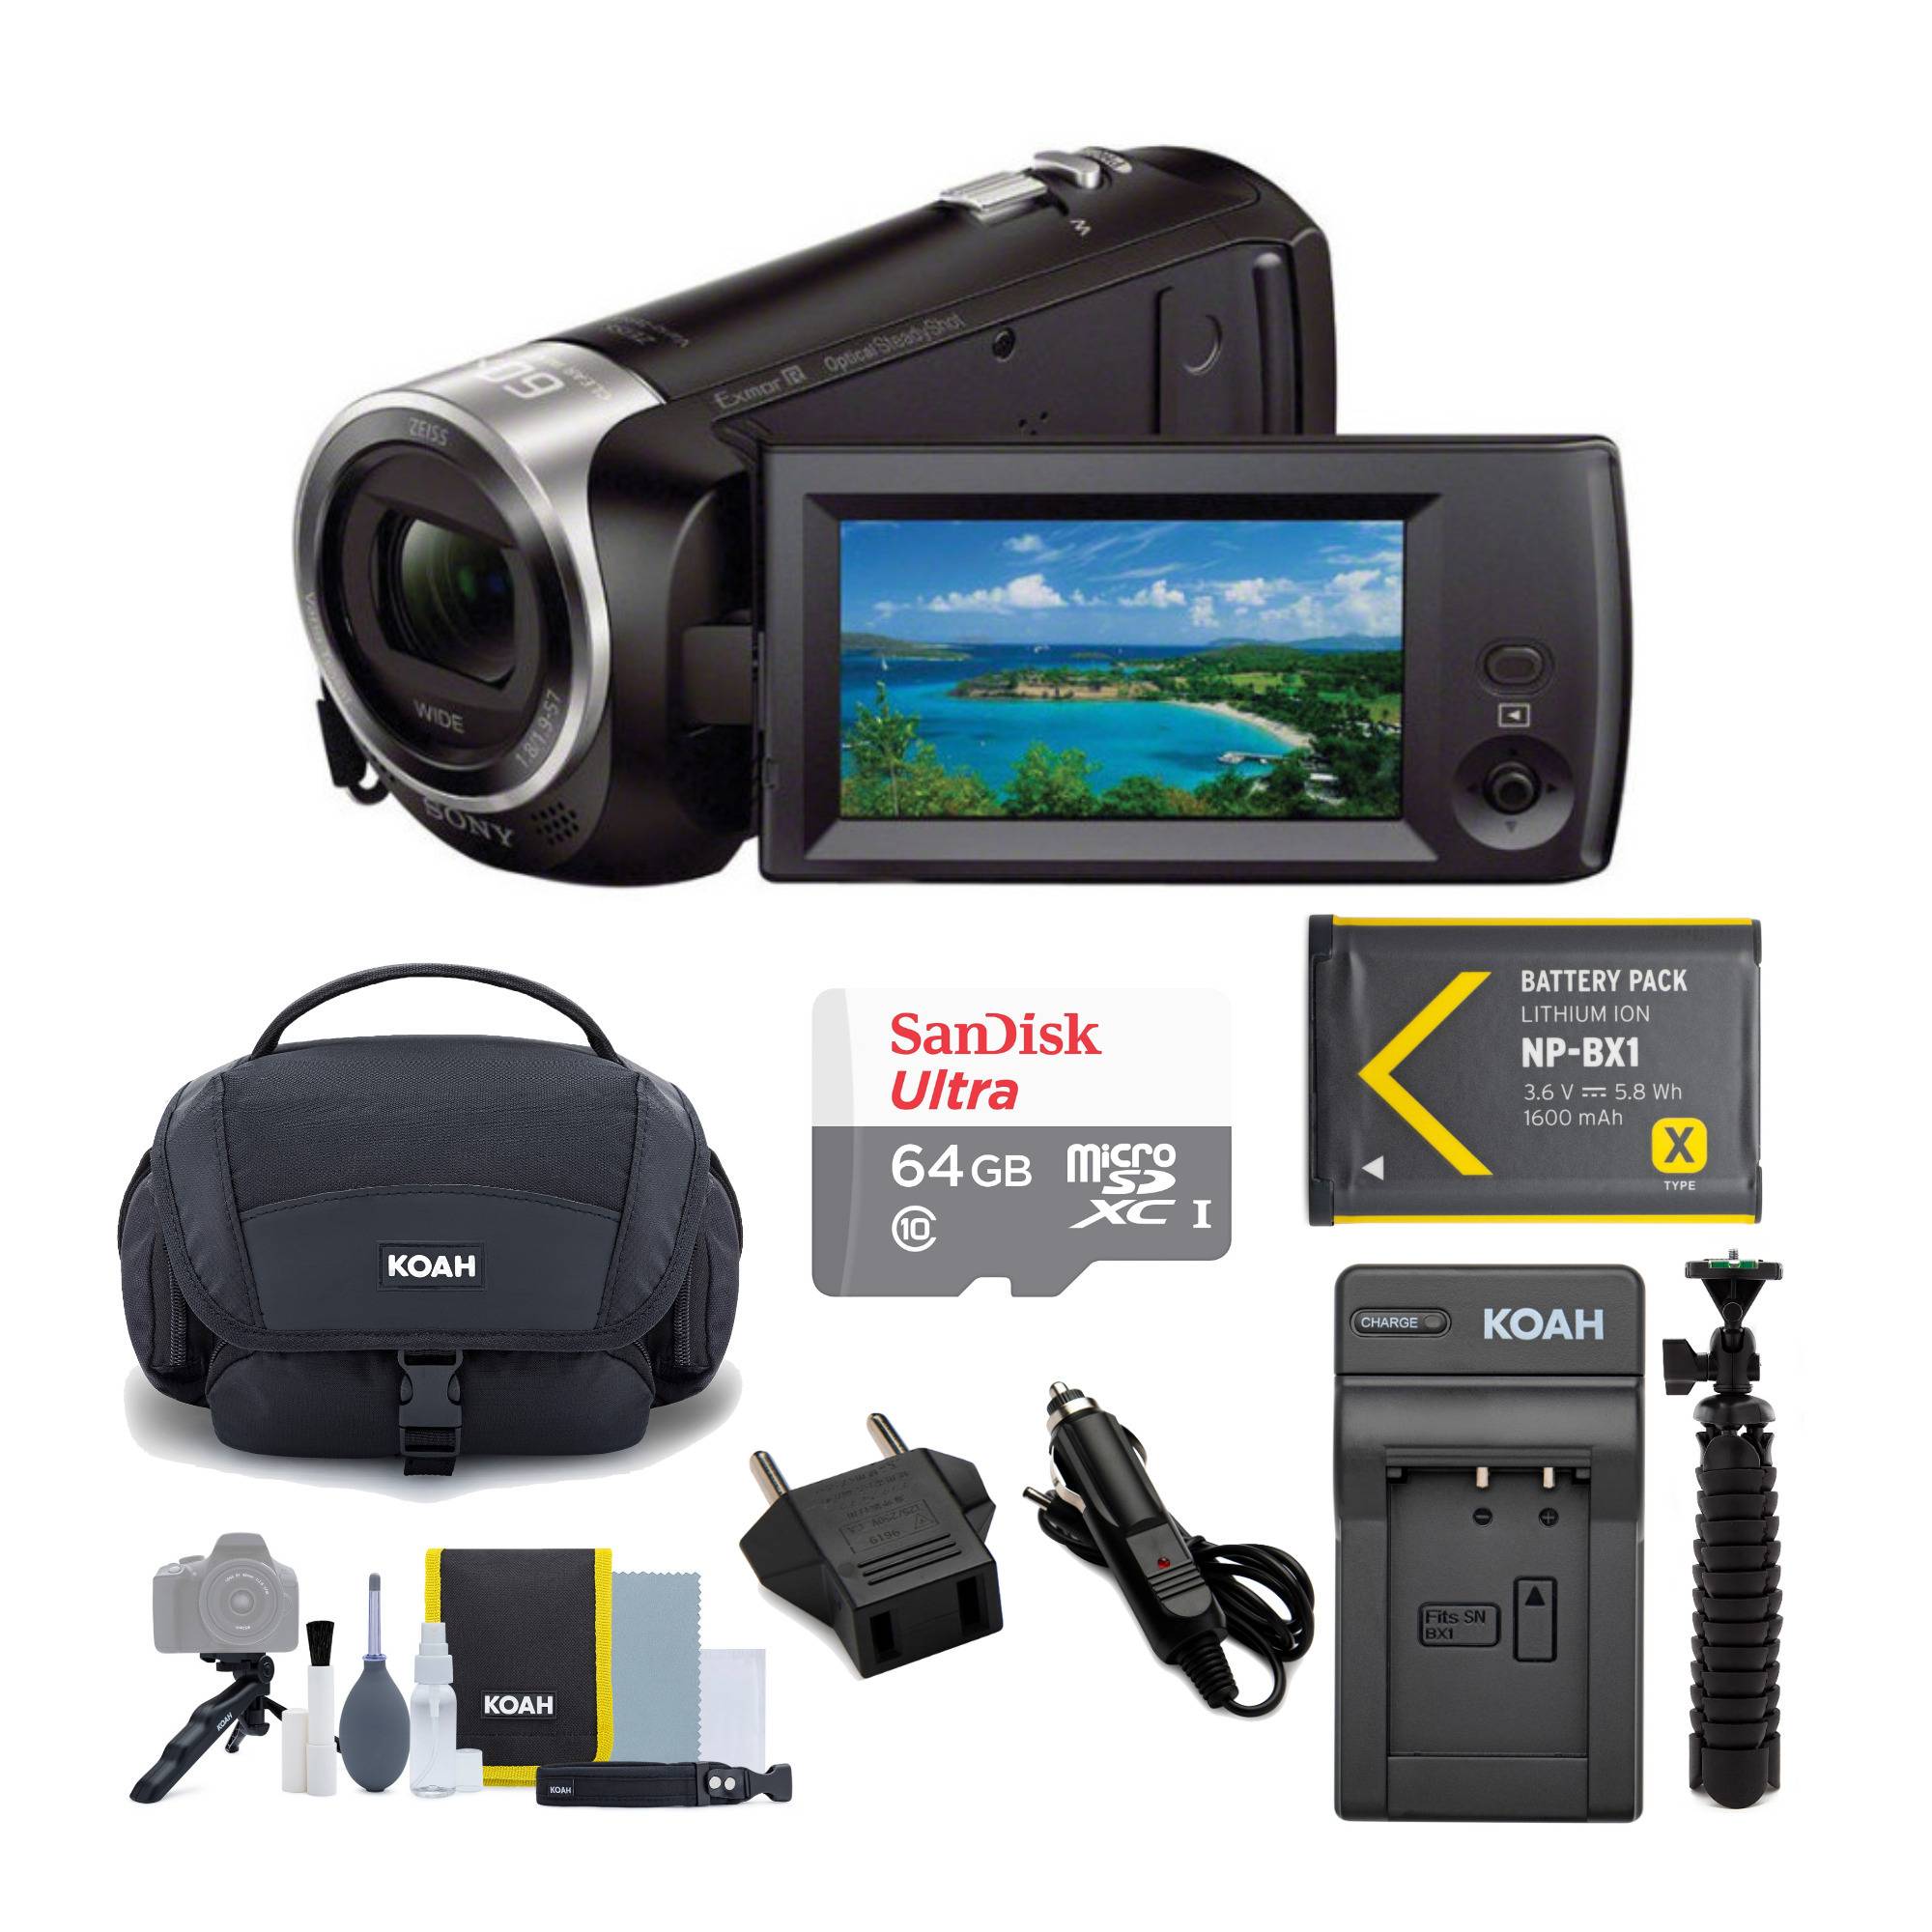 Sony CX405 Handycam 1080p Camcorder with 64GB SD Card and Battery Pack Bundle